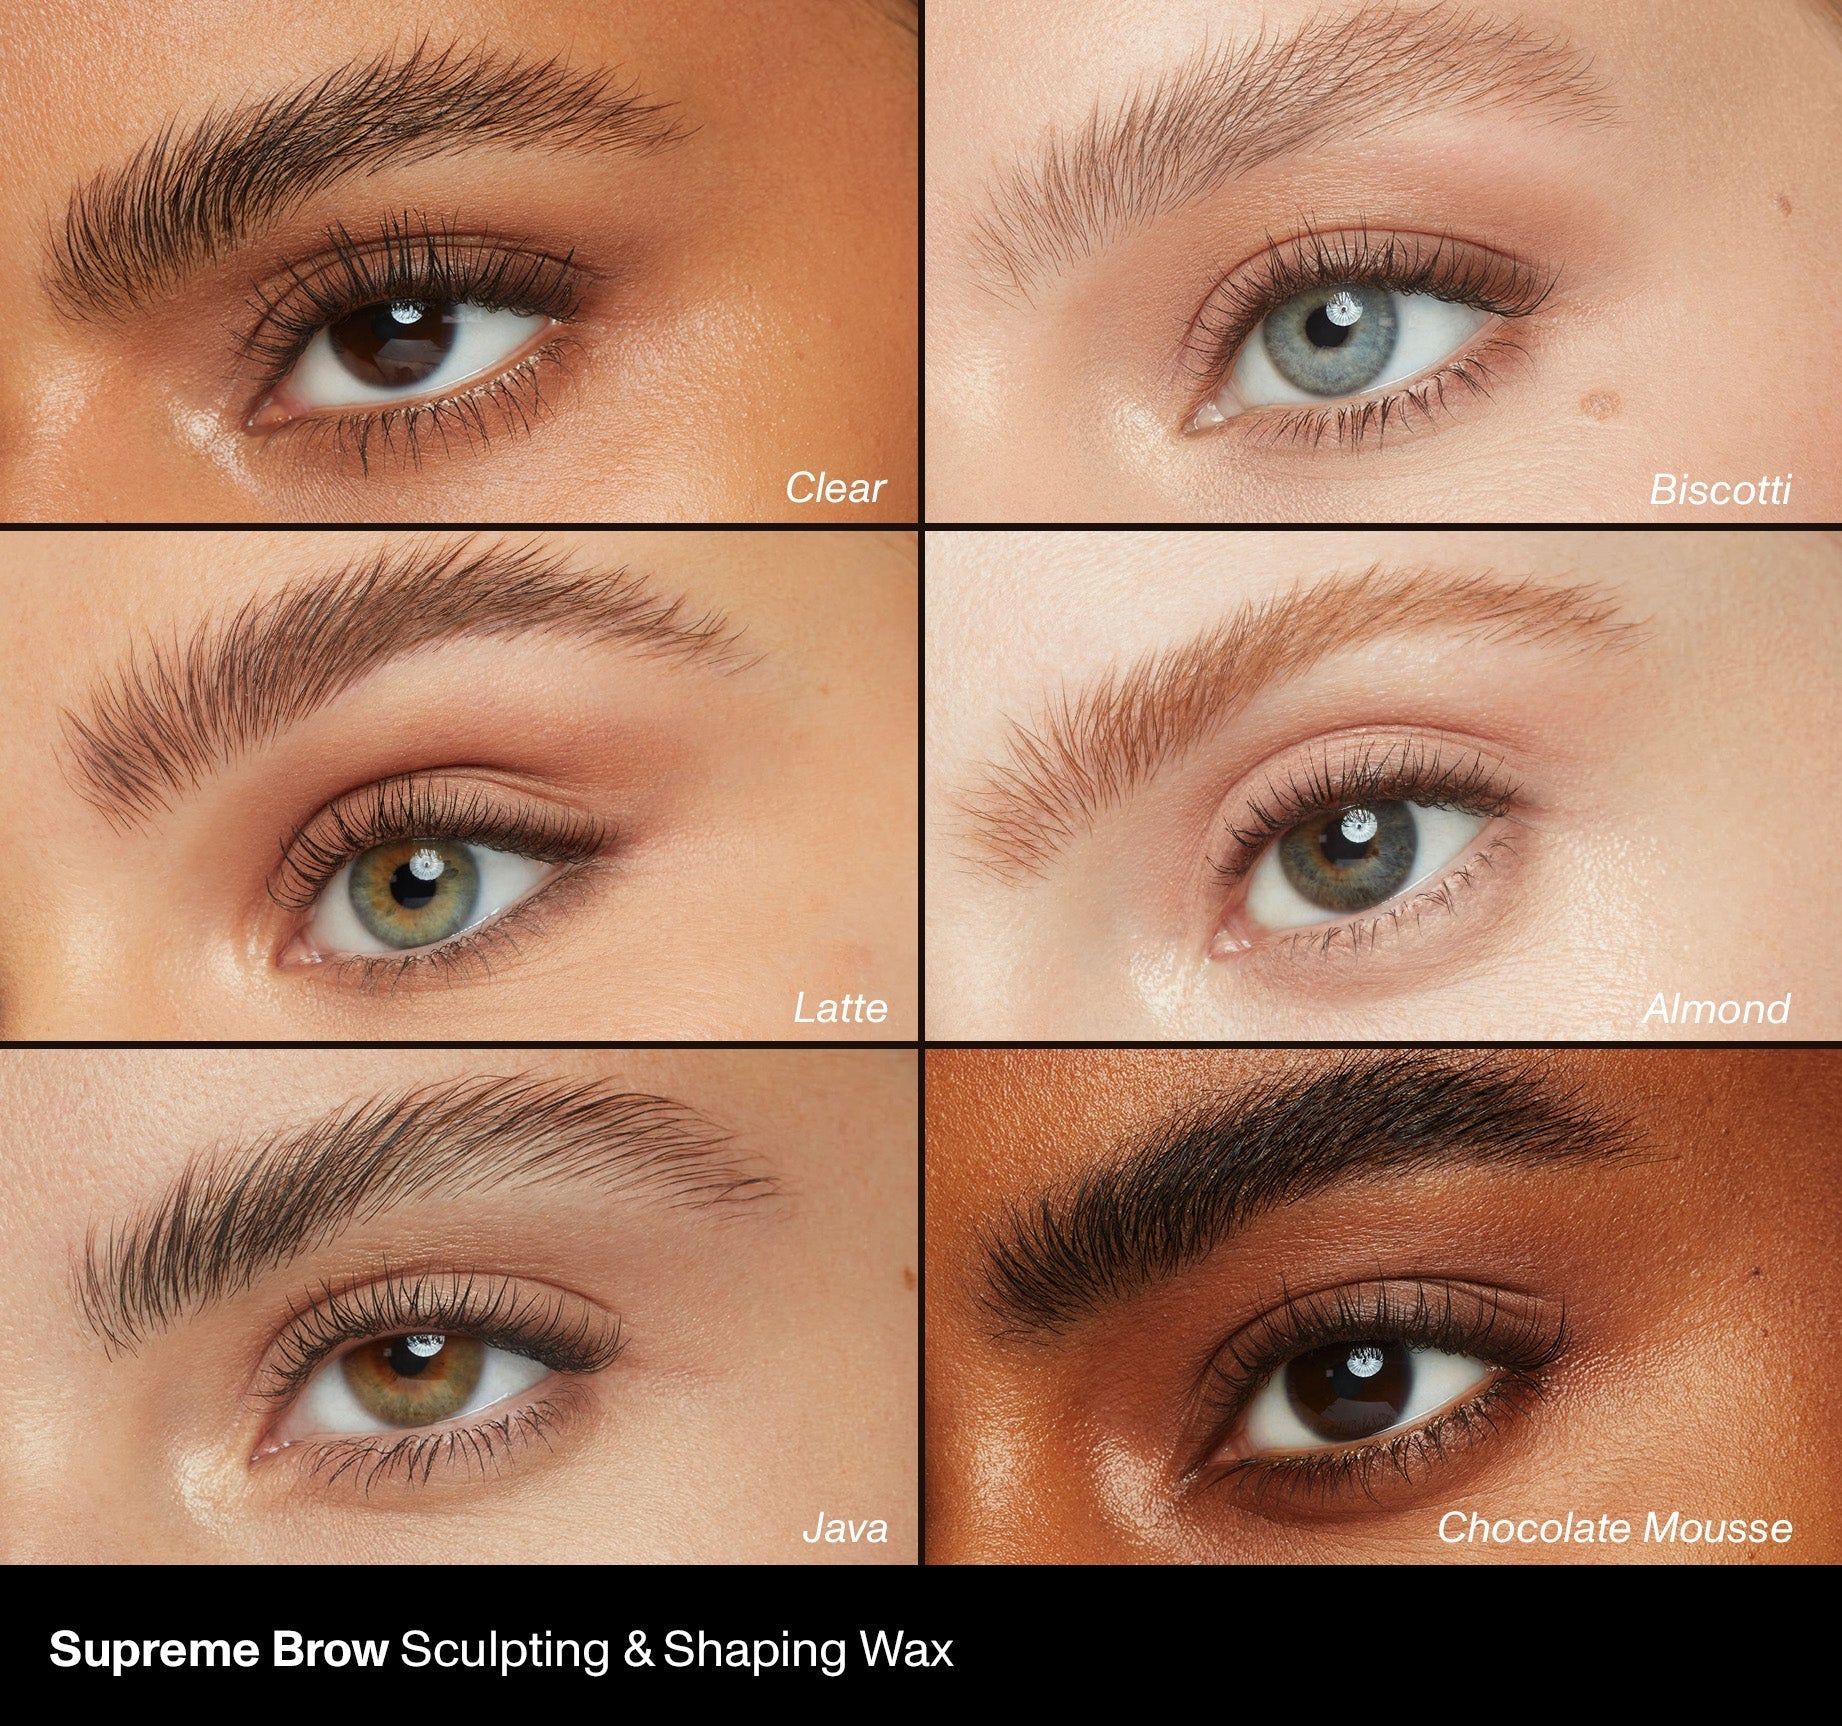 Supreme Brow Sculpting And Shaping Wax - Chocolate Mousse - Image 3